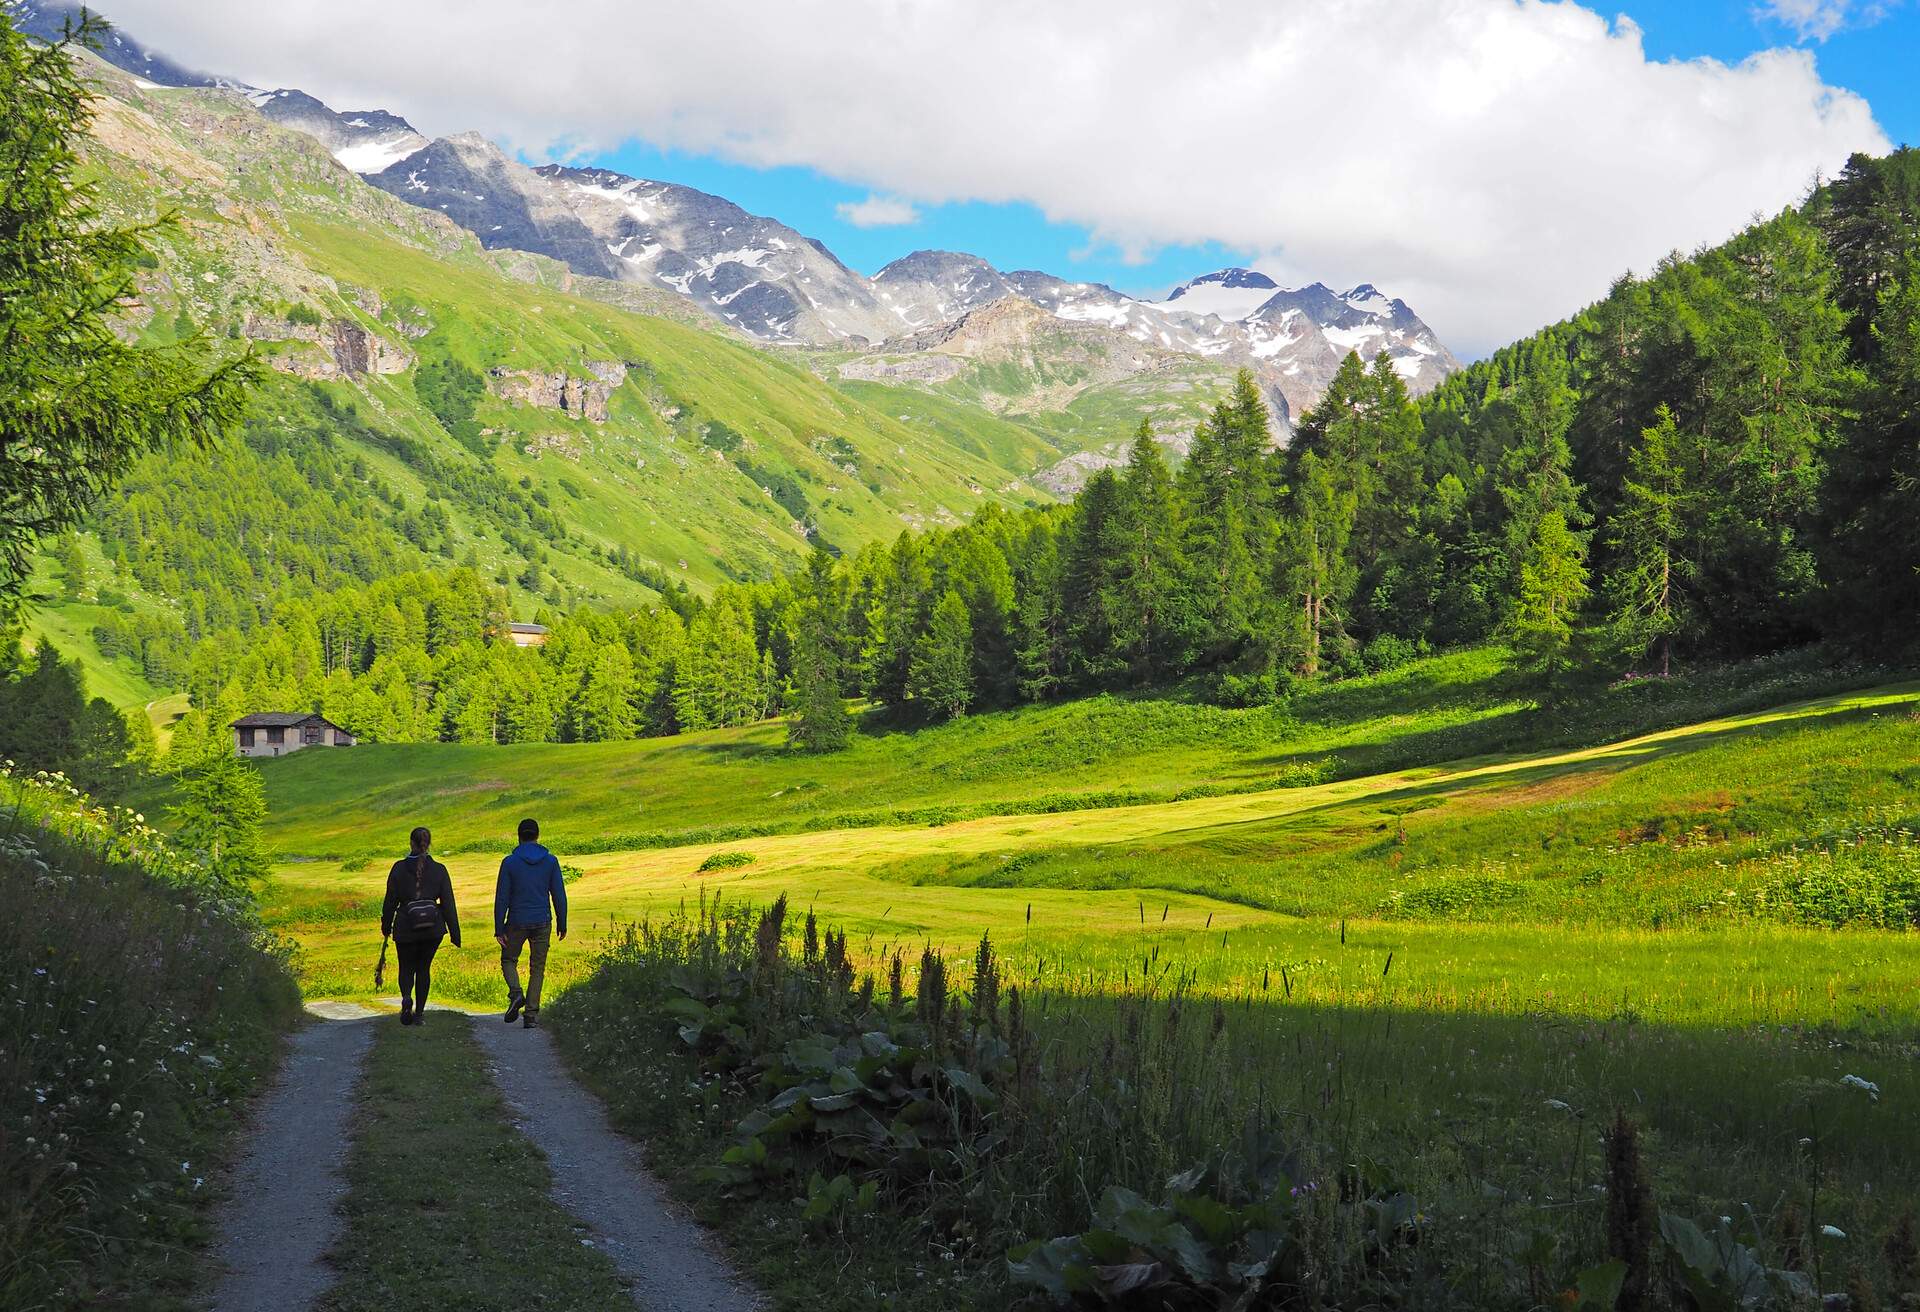 Two silhouettes walking through green sunlit meadow and woodland with view on snowcapped mountains. Romantic Fex Valley in Engadin, Switzerland.